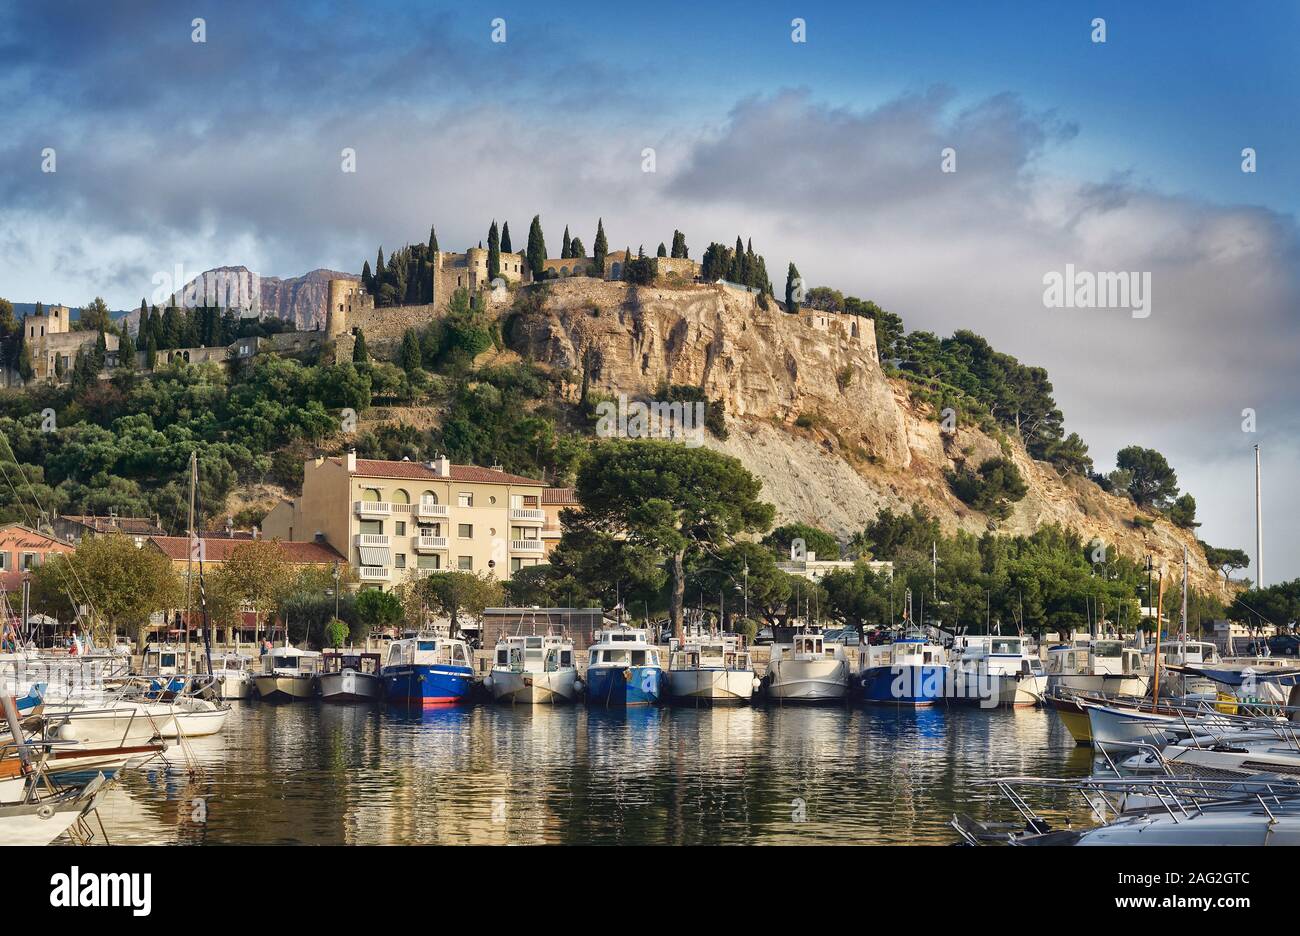 Chateau de Cassis, 13th Century French castle on top of a cliff in Cassis port town, view from the harbor. Southern France. Château de Cassis. Cassis Stock Photo